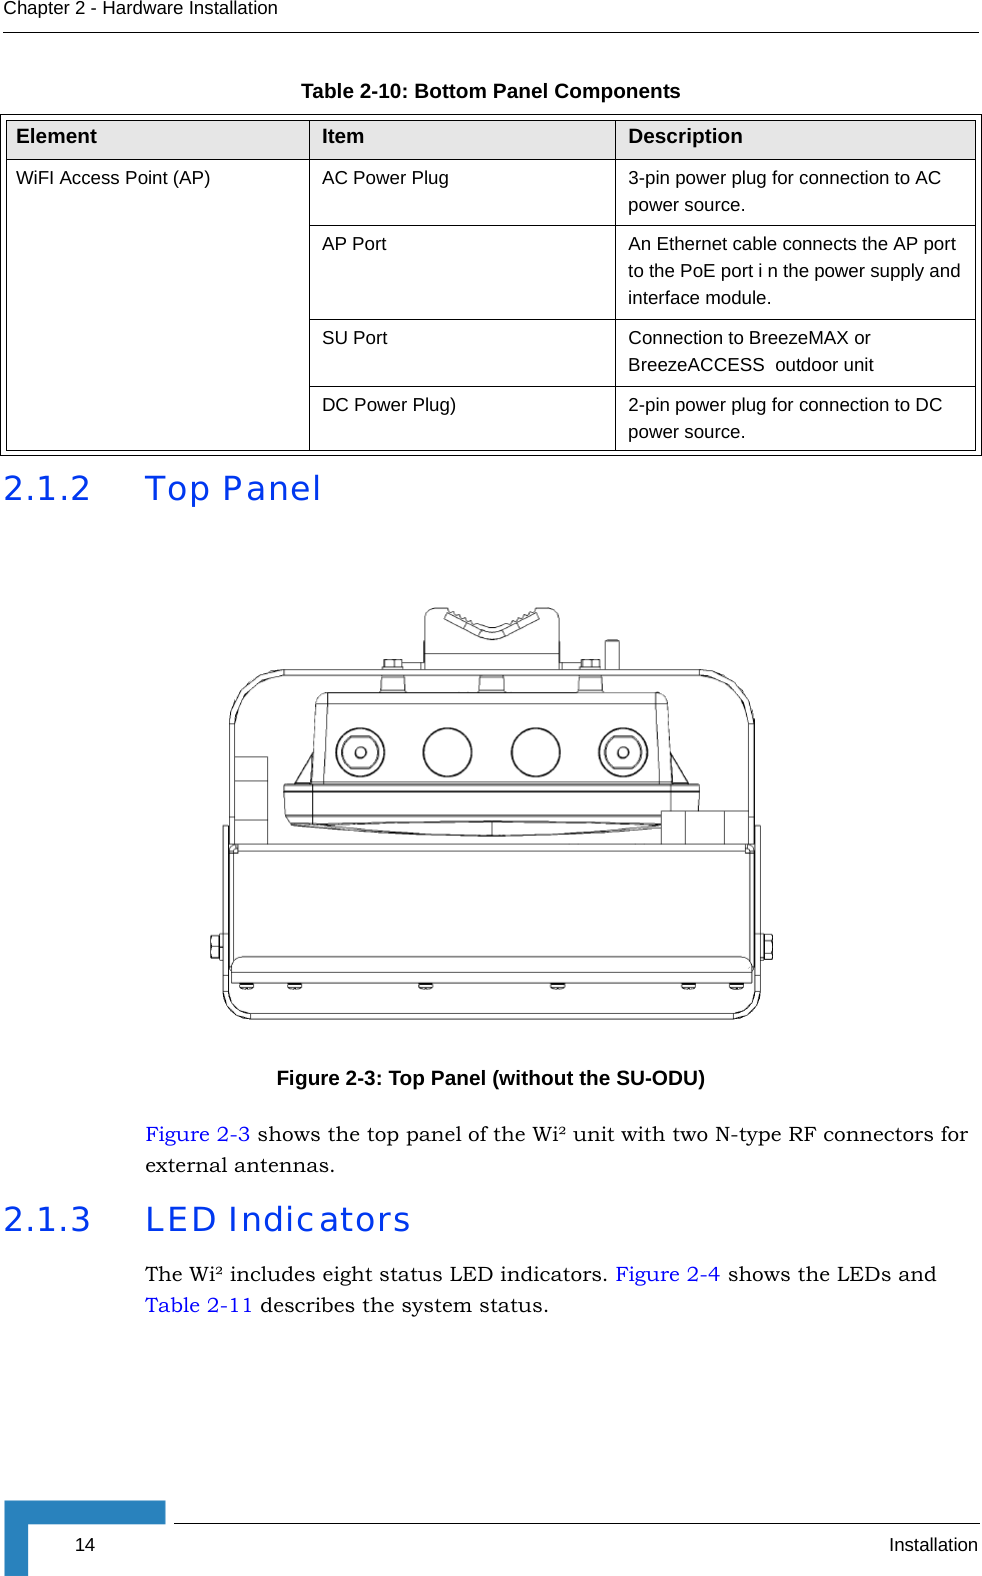 14 InstallationChapter 2 - Hardware Installation2.1.2 Top PanelFigure 2-3 shows the top panel of the Wi² unit with two N-type RF connectors for external antennas.2.1.3 LED IndicatorsThe Wi² includes eight status LED indicators. Figure 2-4 shows the LEDs and Table 2-11 describes the system status. WiFI Access Point (AP) AC Power Plug  3-pin power plug for connection to AC power source. AP Port An Ethernet cable connects the AP port to the PoE port i n the power supply and interface module.SU Port Connection to BreezeMAX or BreezeACCESS  outdoor unitDC Power Plug) 2-pin power plug for connection to DC power source. Figure 2-3: Top Panel (without the SU-ODU)Table 2-10: Bottom Panel ComponentsElement Item Description